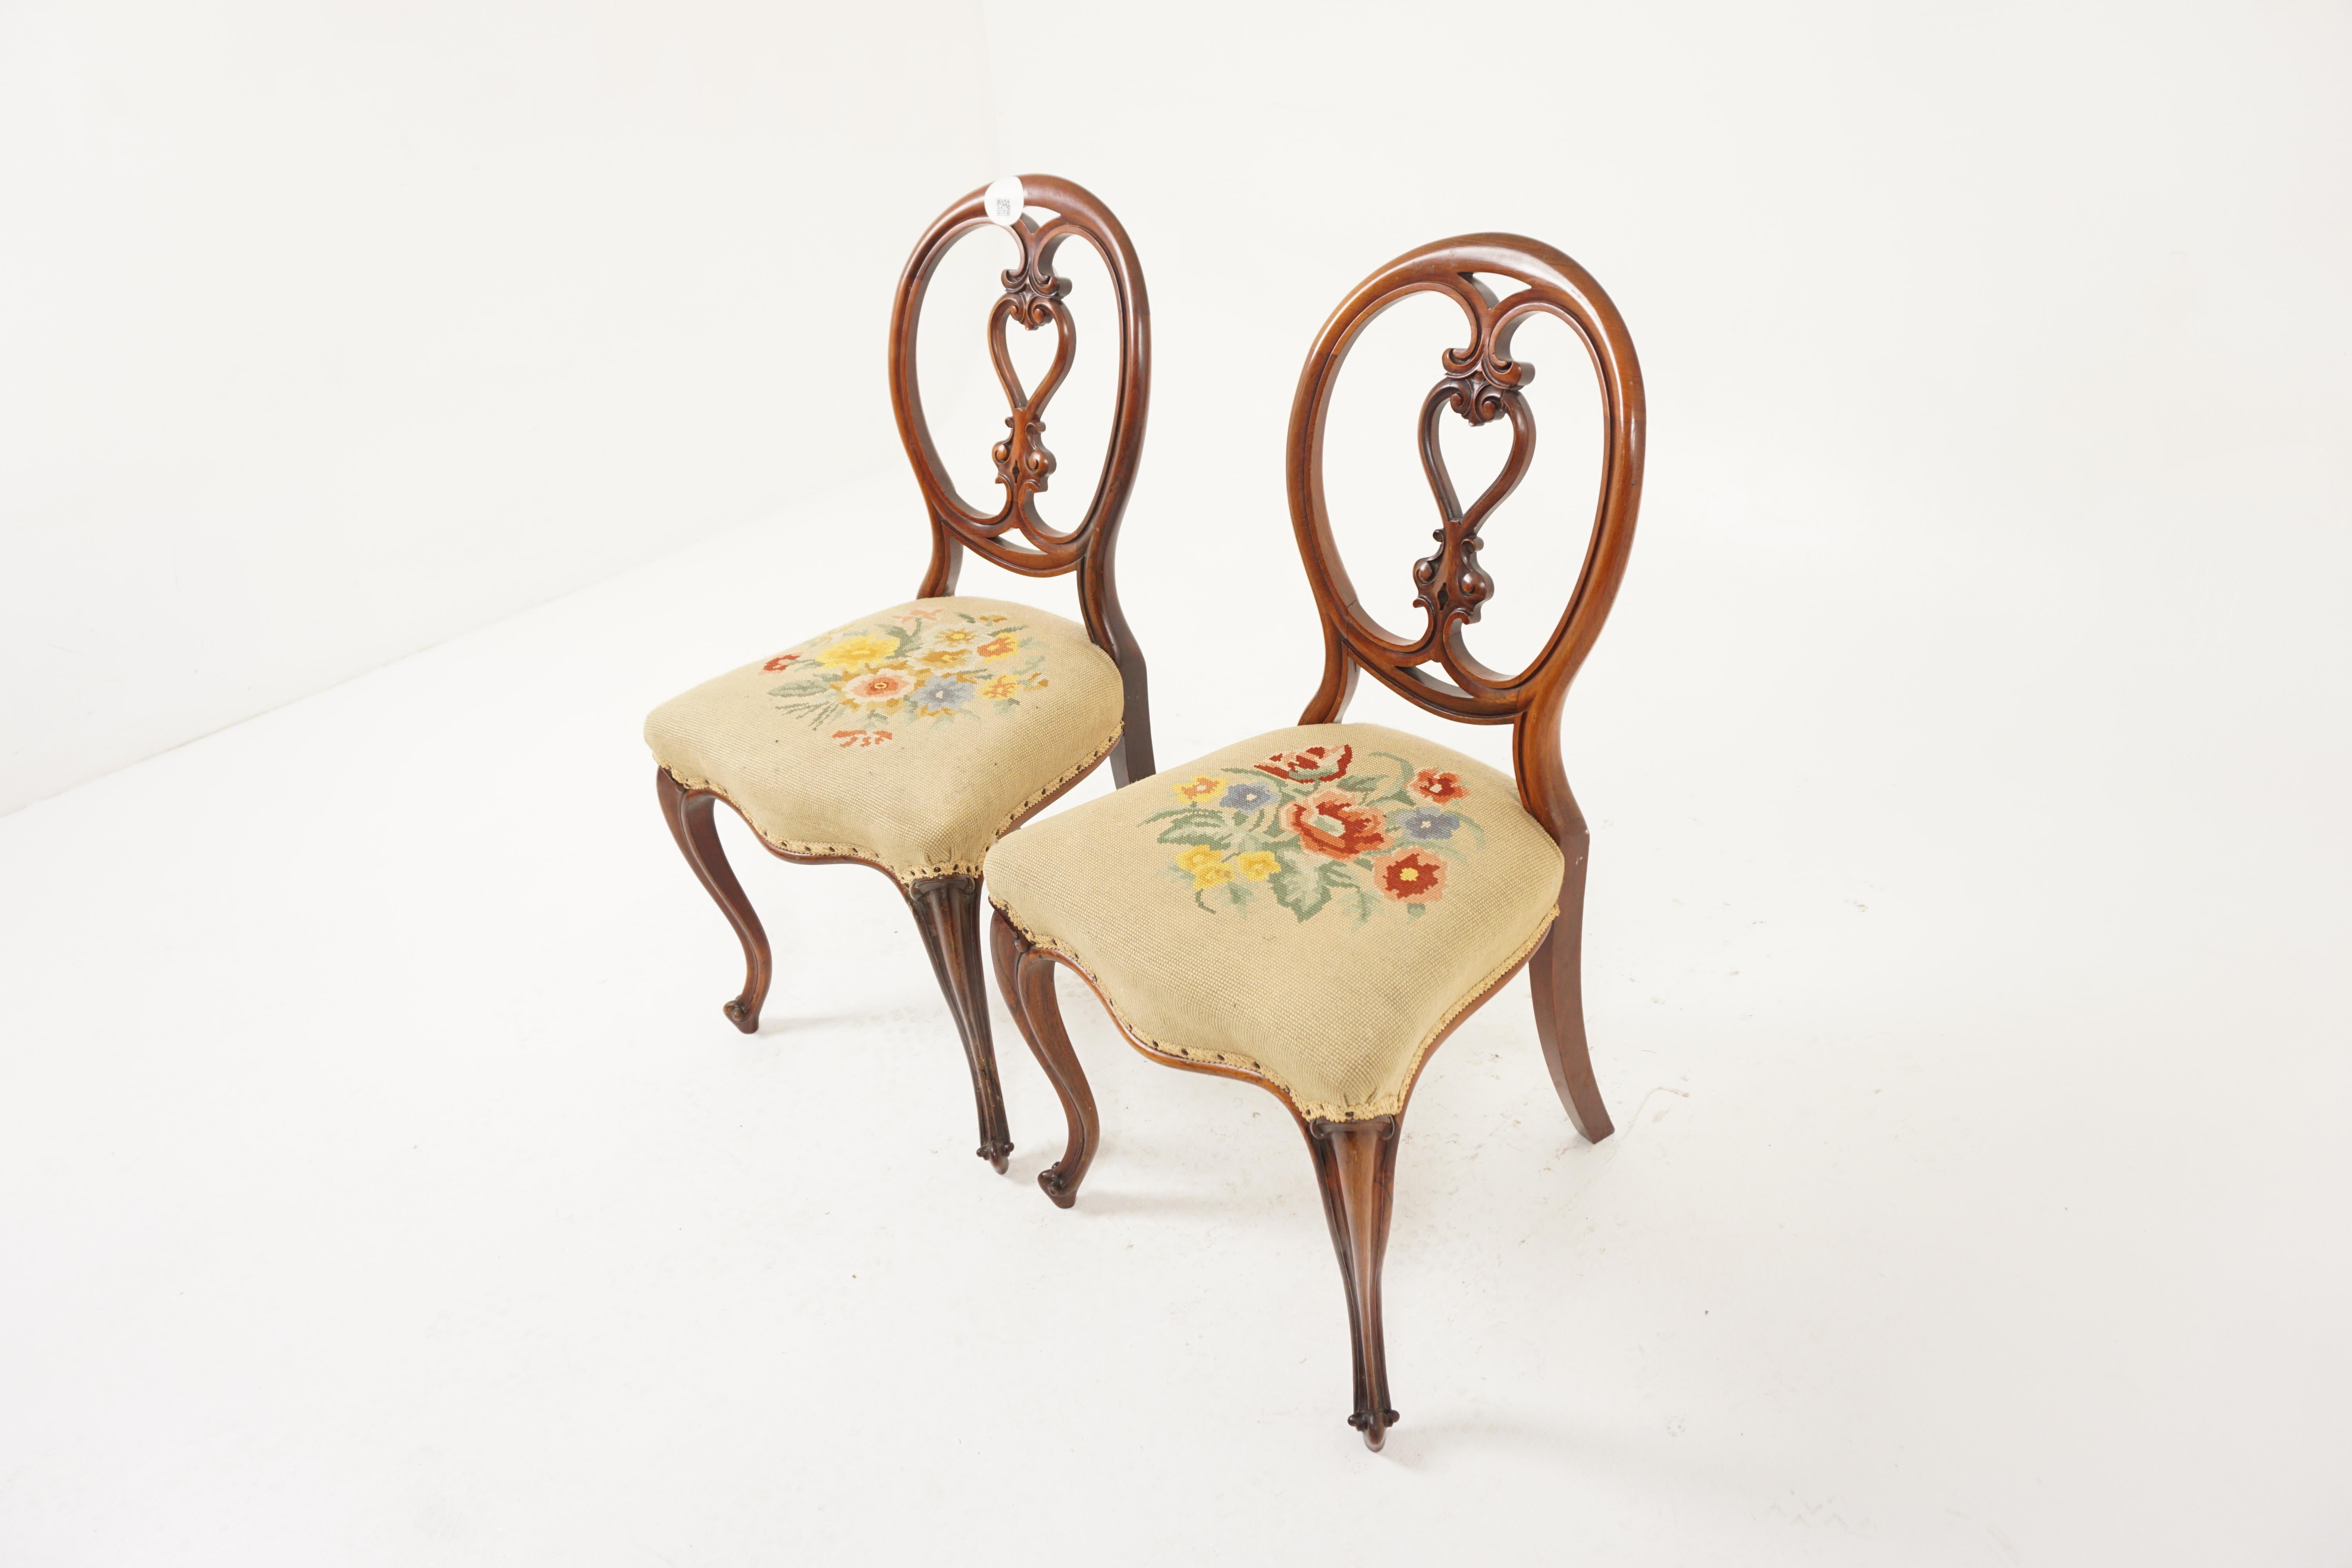 Antique Walnut Chairs, Pair of Victorian Carved Walnut Side Chairs, Hall Chairs, Antique Furniture, Scotland 1880, H1050

+ Scotland 1890
+ Solid Walnut
+ Original Finish
+ Having a quality balloon back with a pretty carved top rail and a